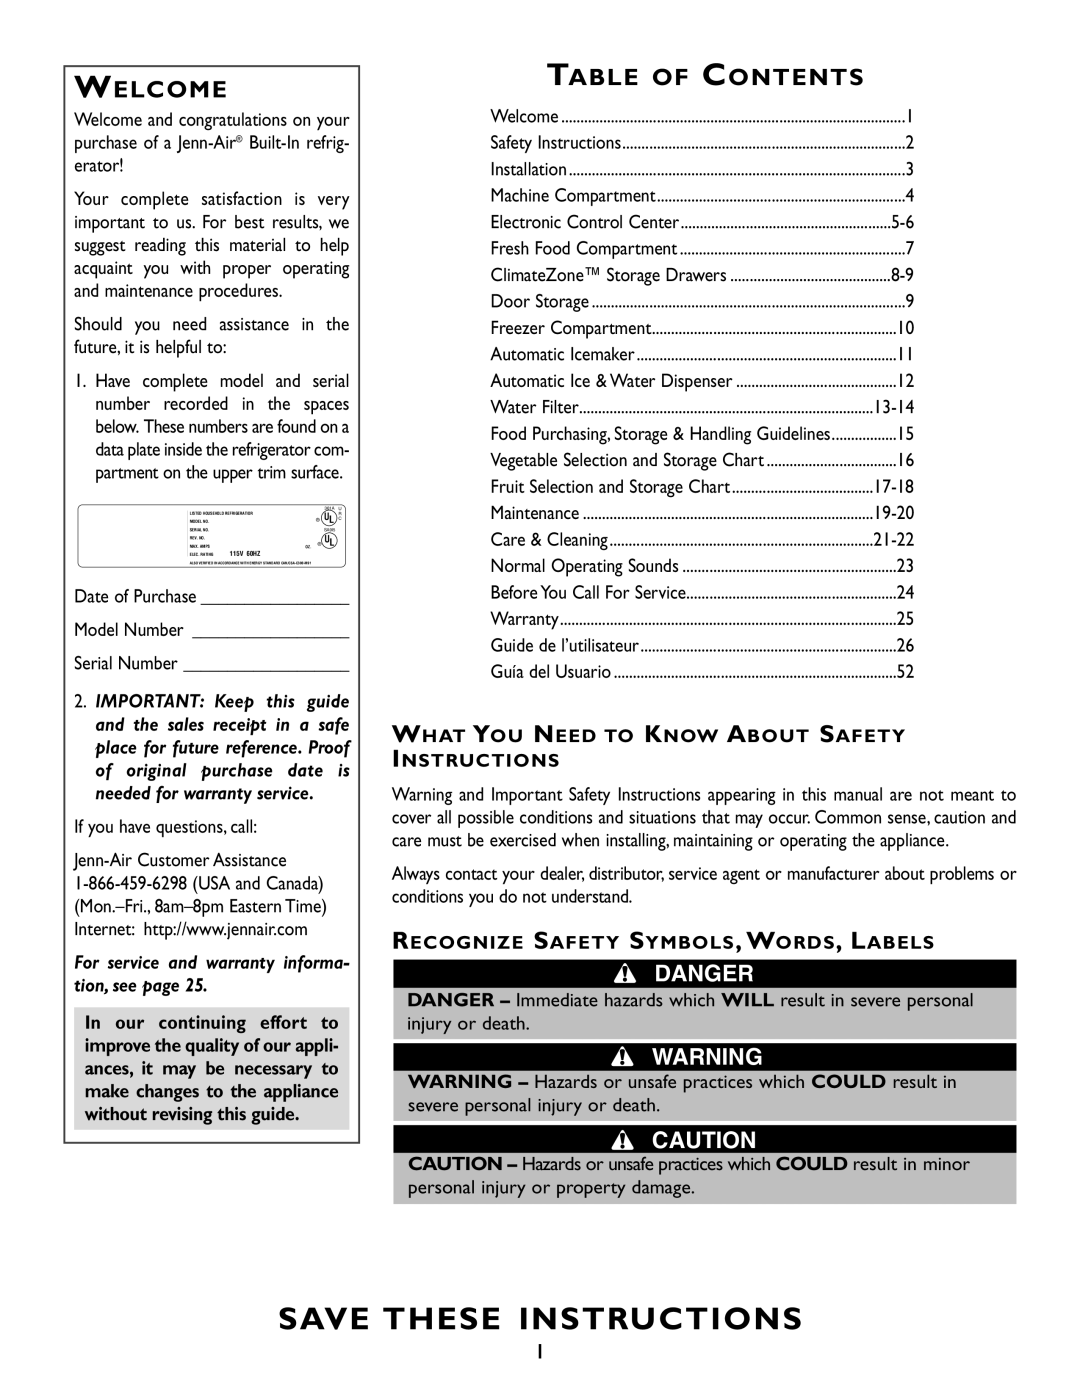 Maytag RJRS4880D, RJRS4881A, RJRS4880B, RJRS4880A, RJRS4880C manual Save These Instructions, Welcome, Table Of Contents, Danger 